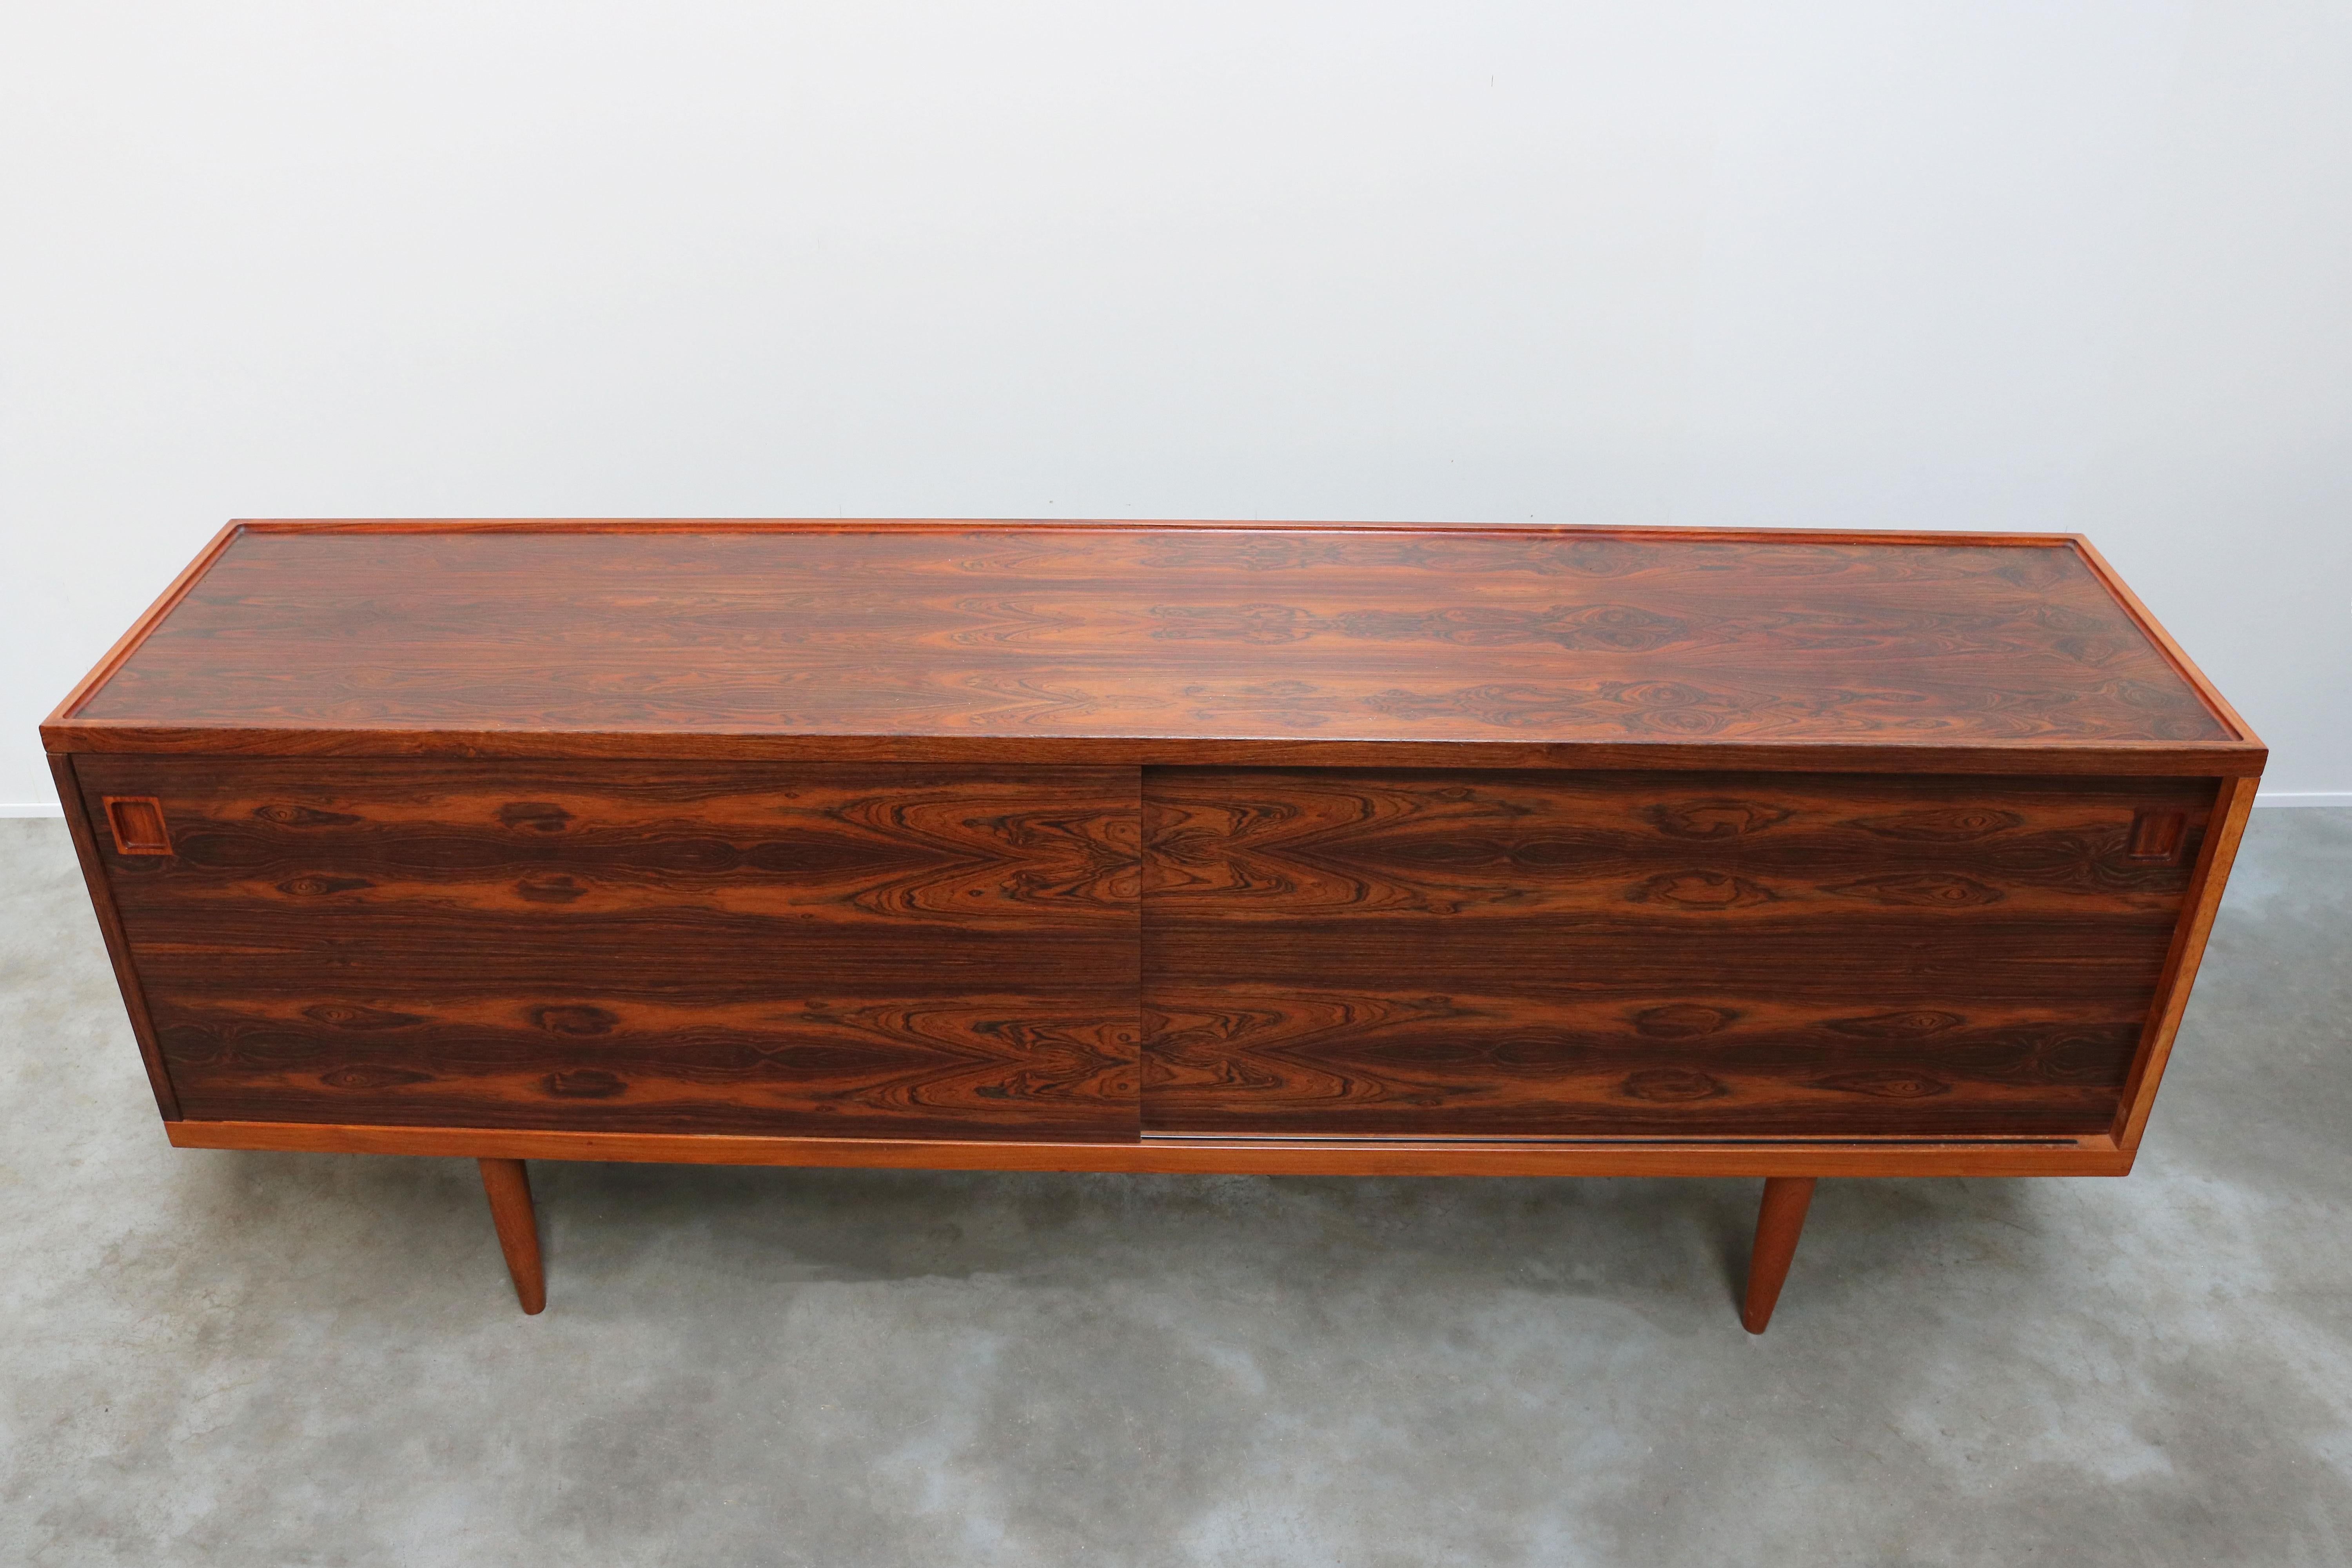 Rare Danish Credenza / Sideboard Model 20 by Niels Otto Moller 1950 Rosewood For Sale 3